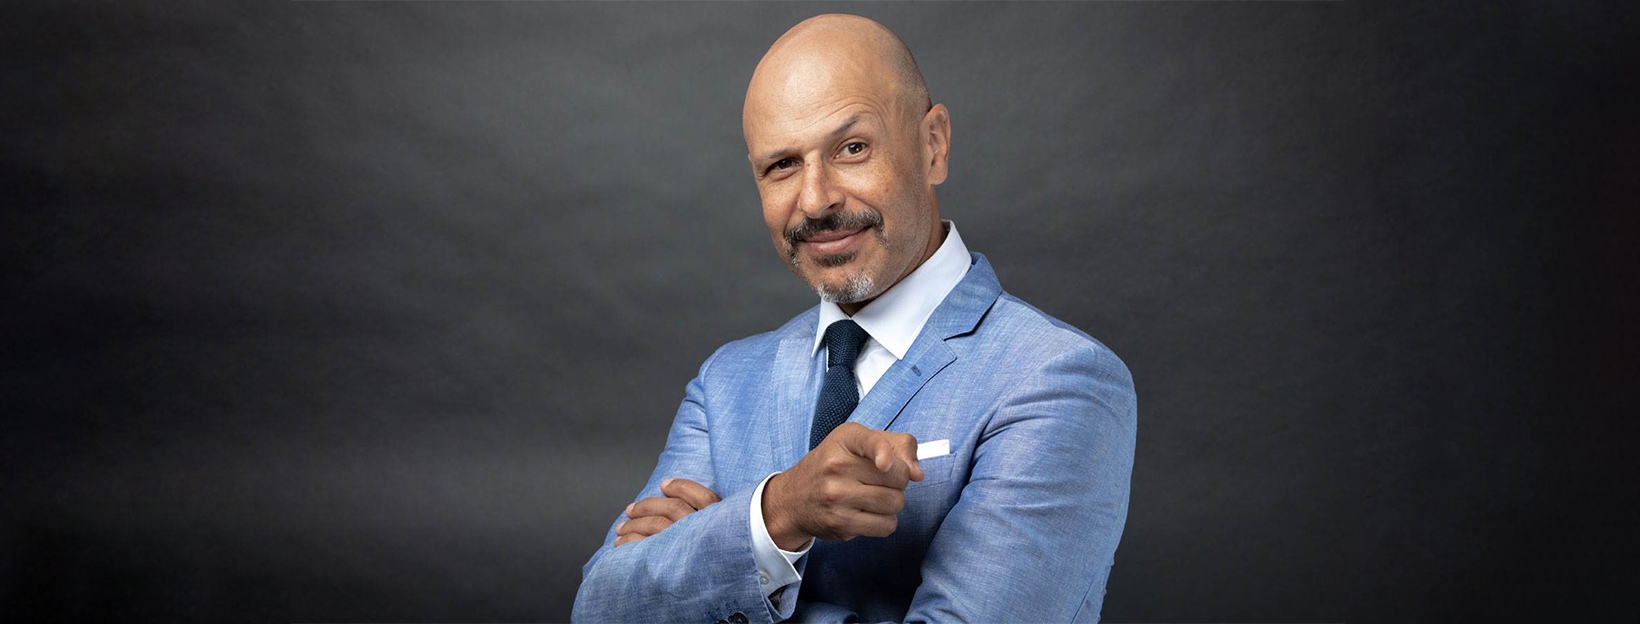 Maz Jobrani in a light blue suit pointing at the lens with a raised eyebrow